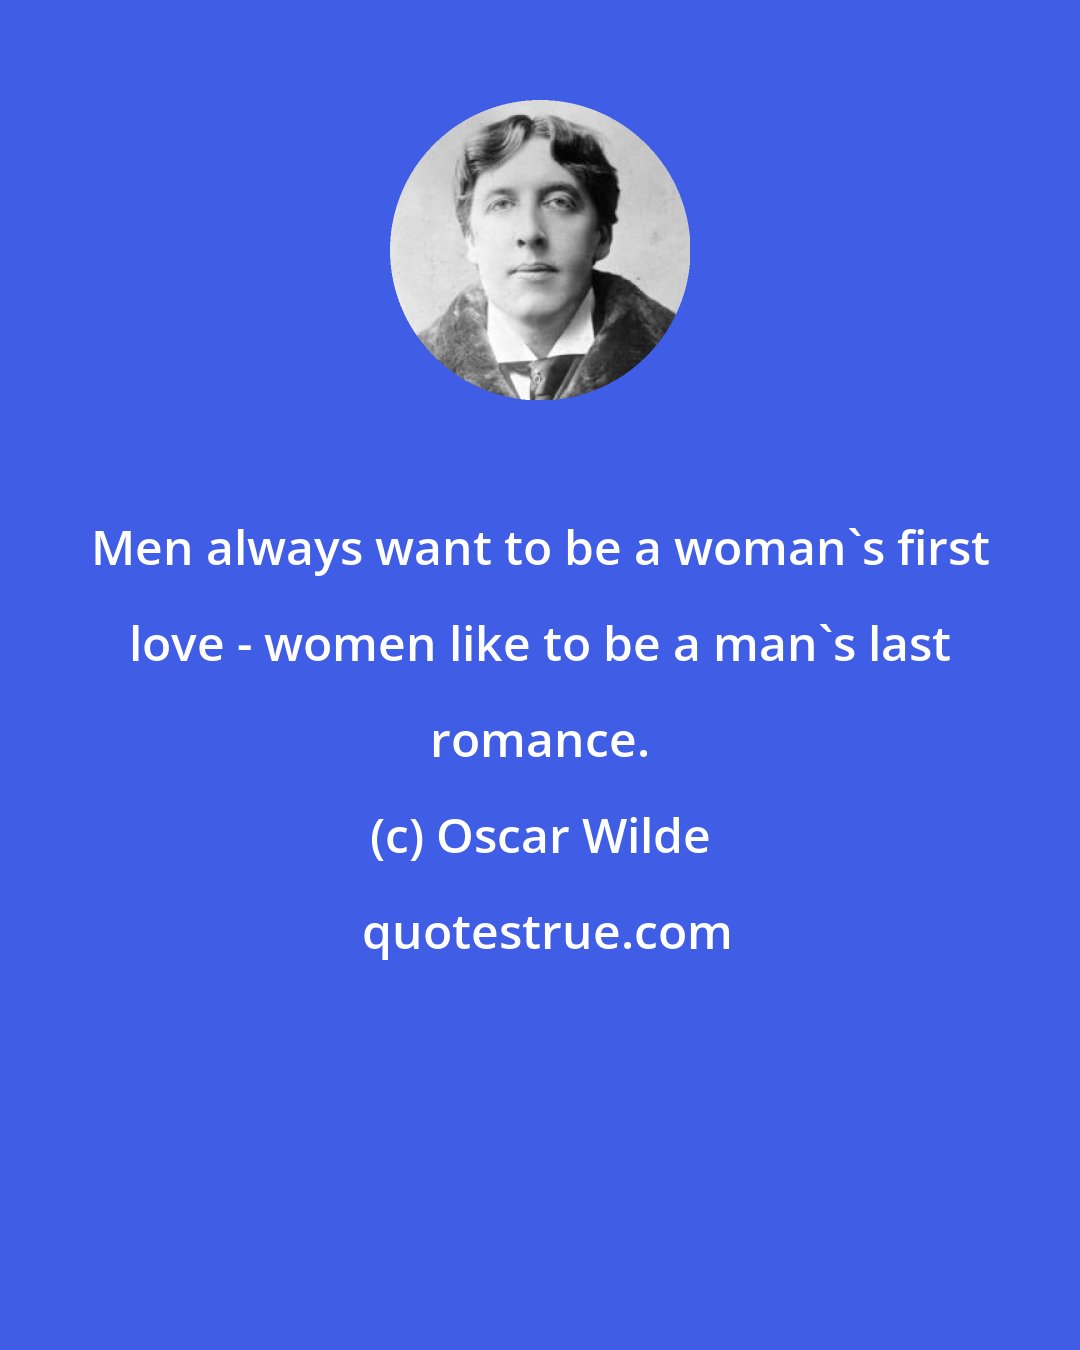 Oscar Wilde: Men always want to be a woman's first love - women like to be a man's last romance.